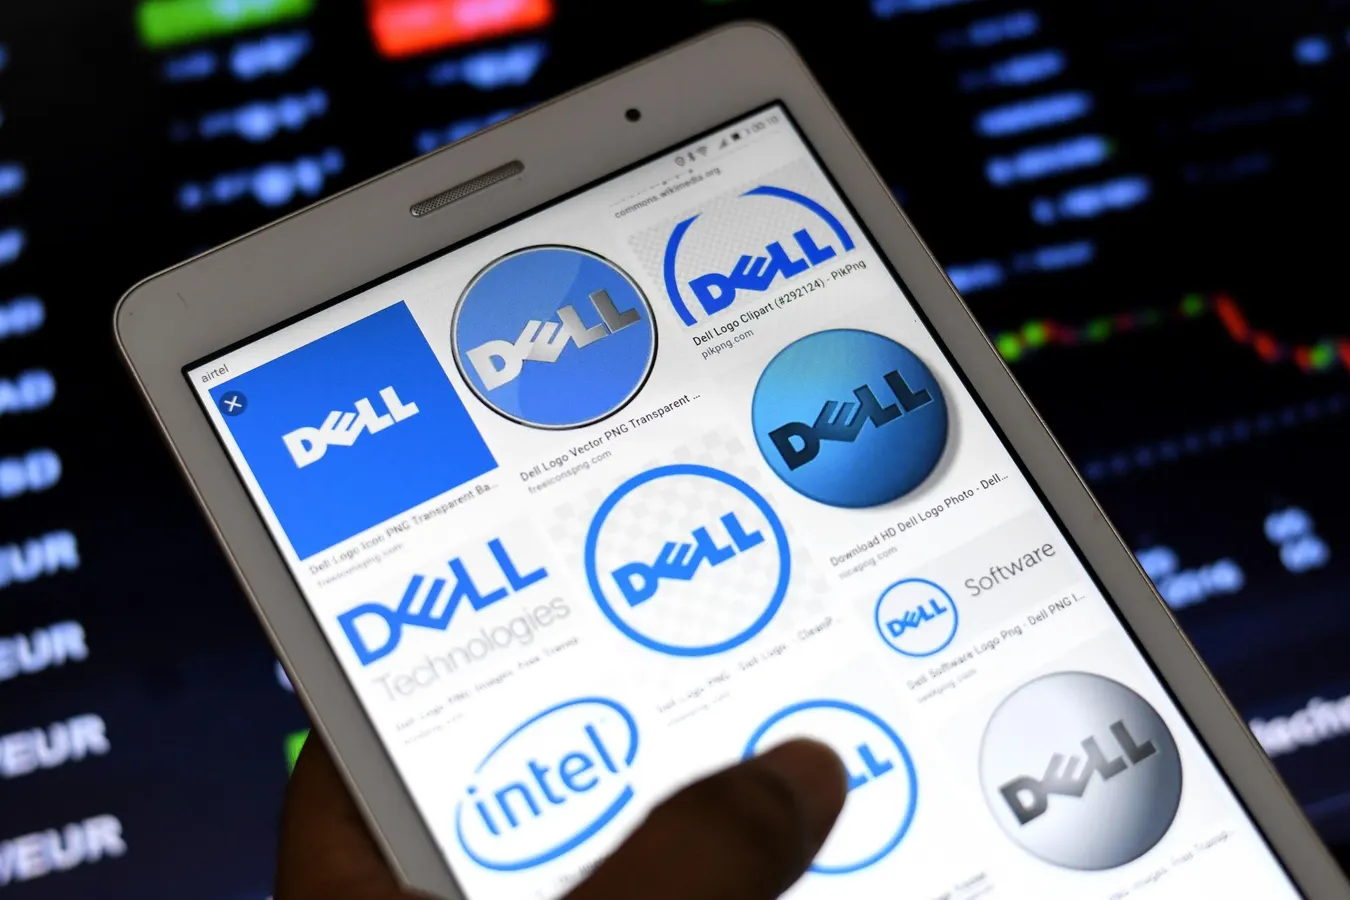 Dell Confirms Database Hacked—Hacker Says 49 Million Customers Hit